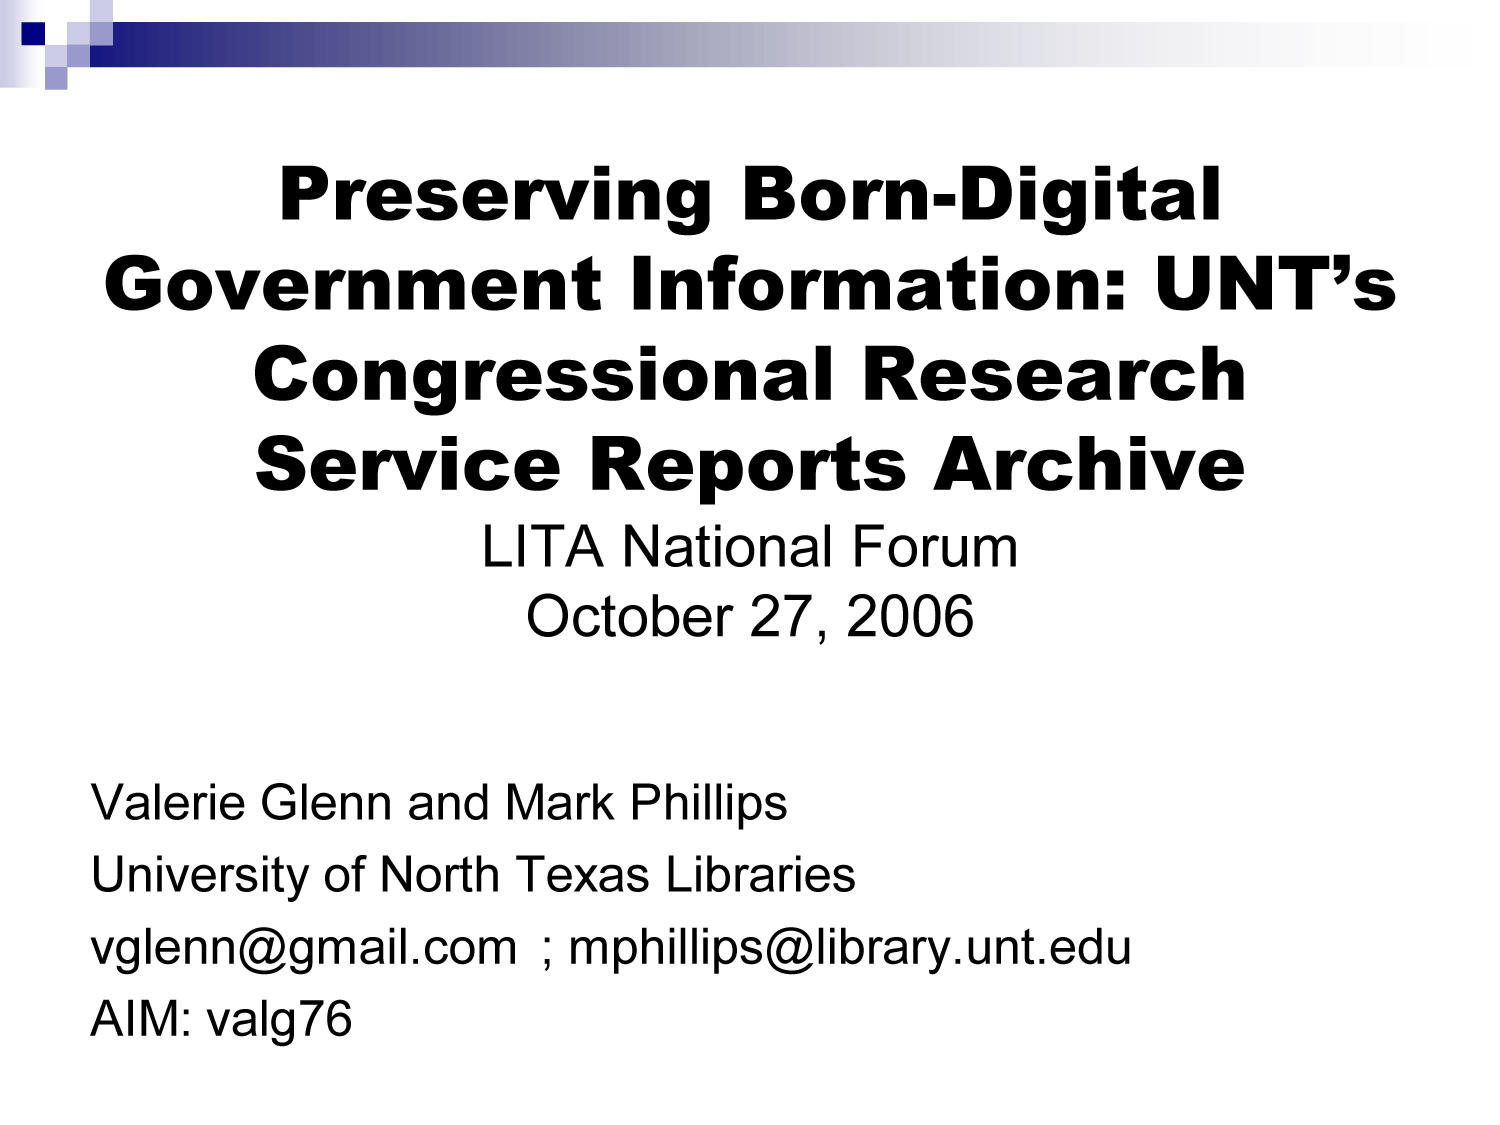 Preserving Born-Digital Government Information: UNT's Congressional Research Service Reports Archive
                                                
                                                    [Sequence #]: 1 of 12
                                                